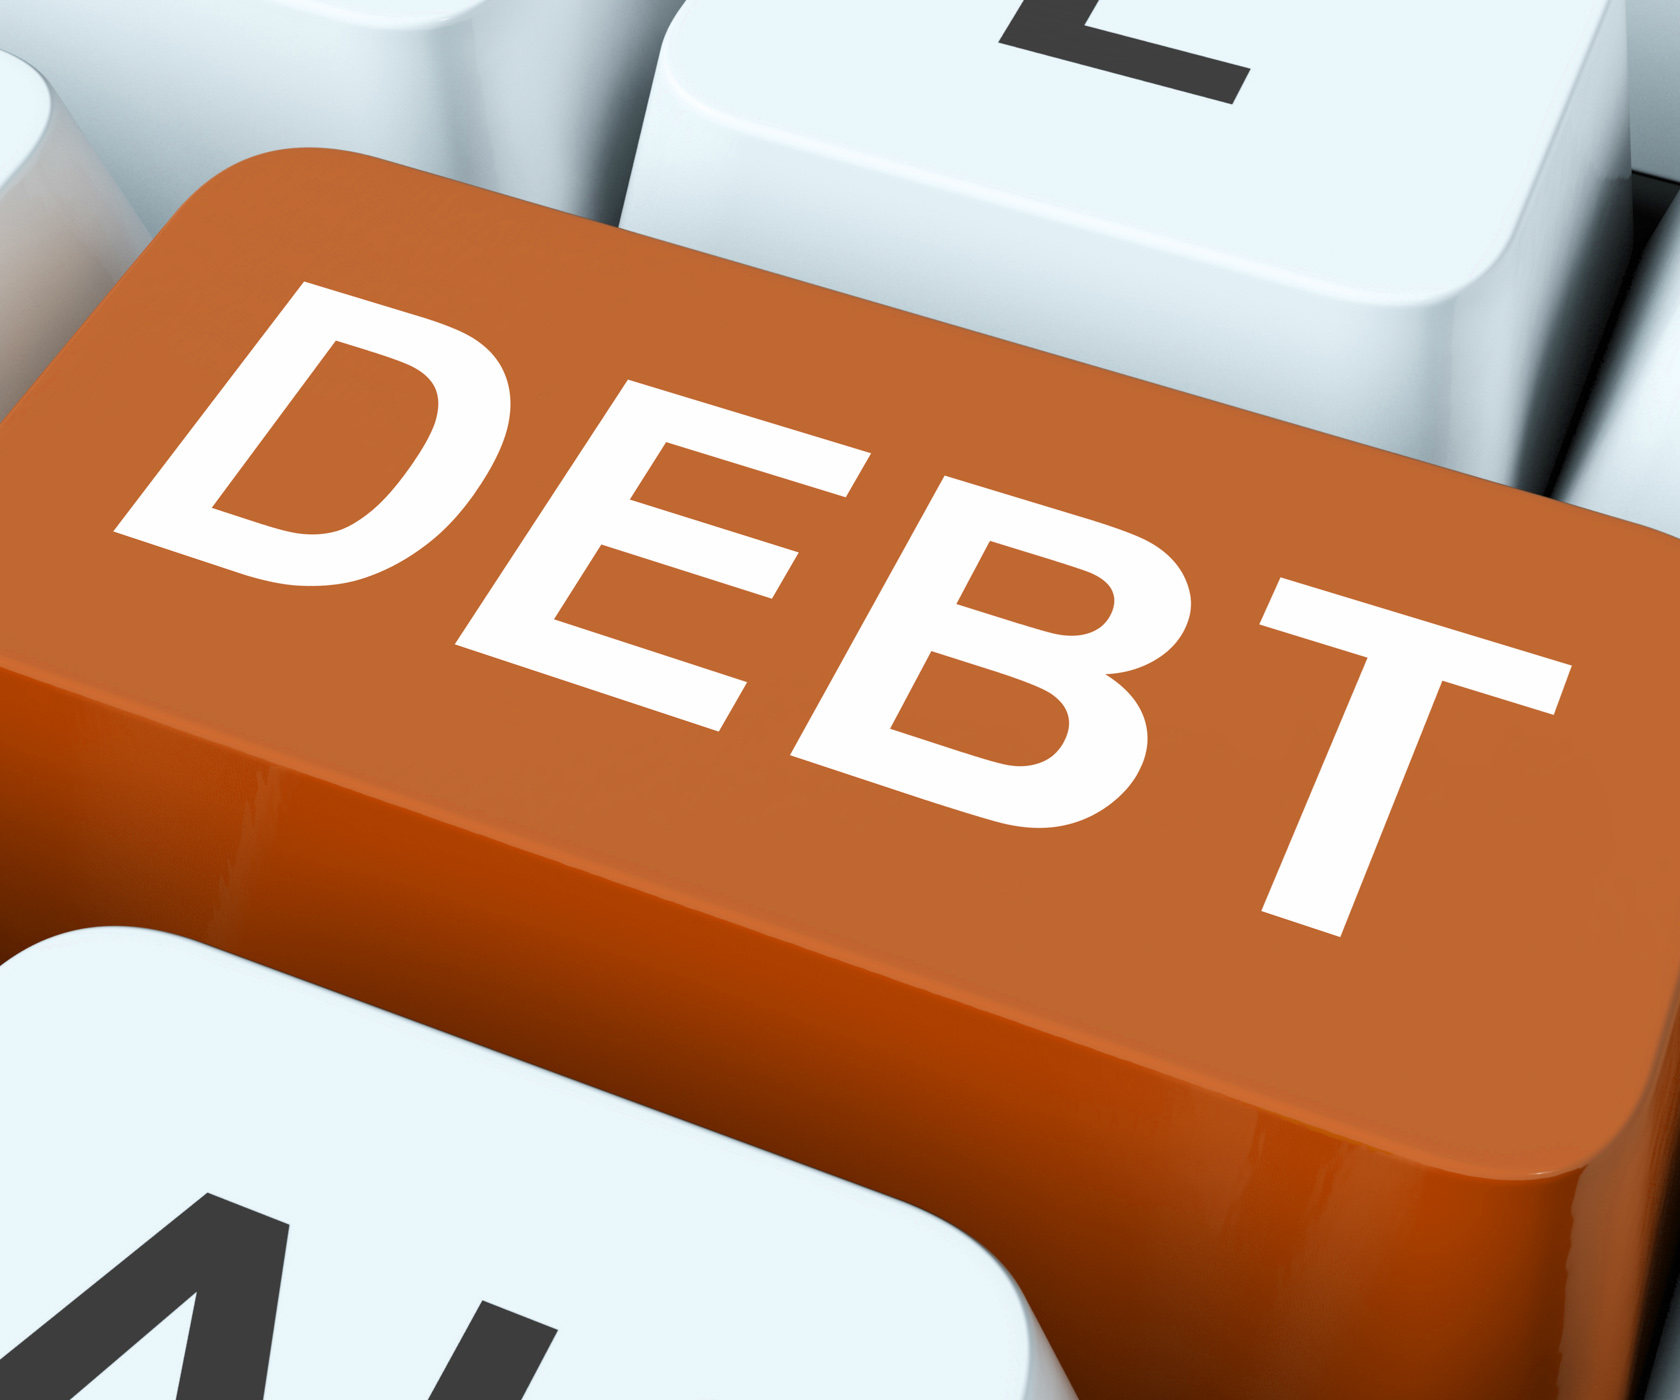 Debt key show indebtedness or liabilities photo